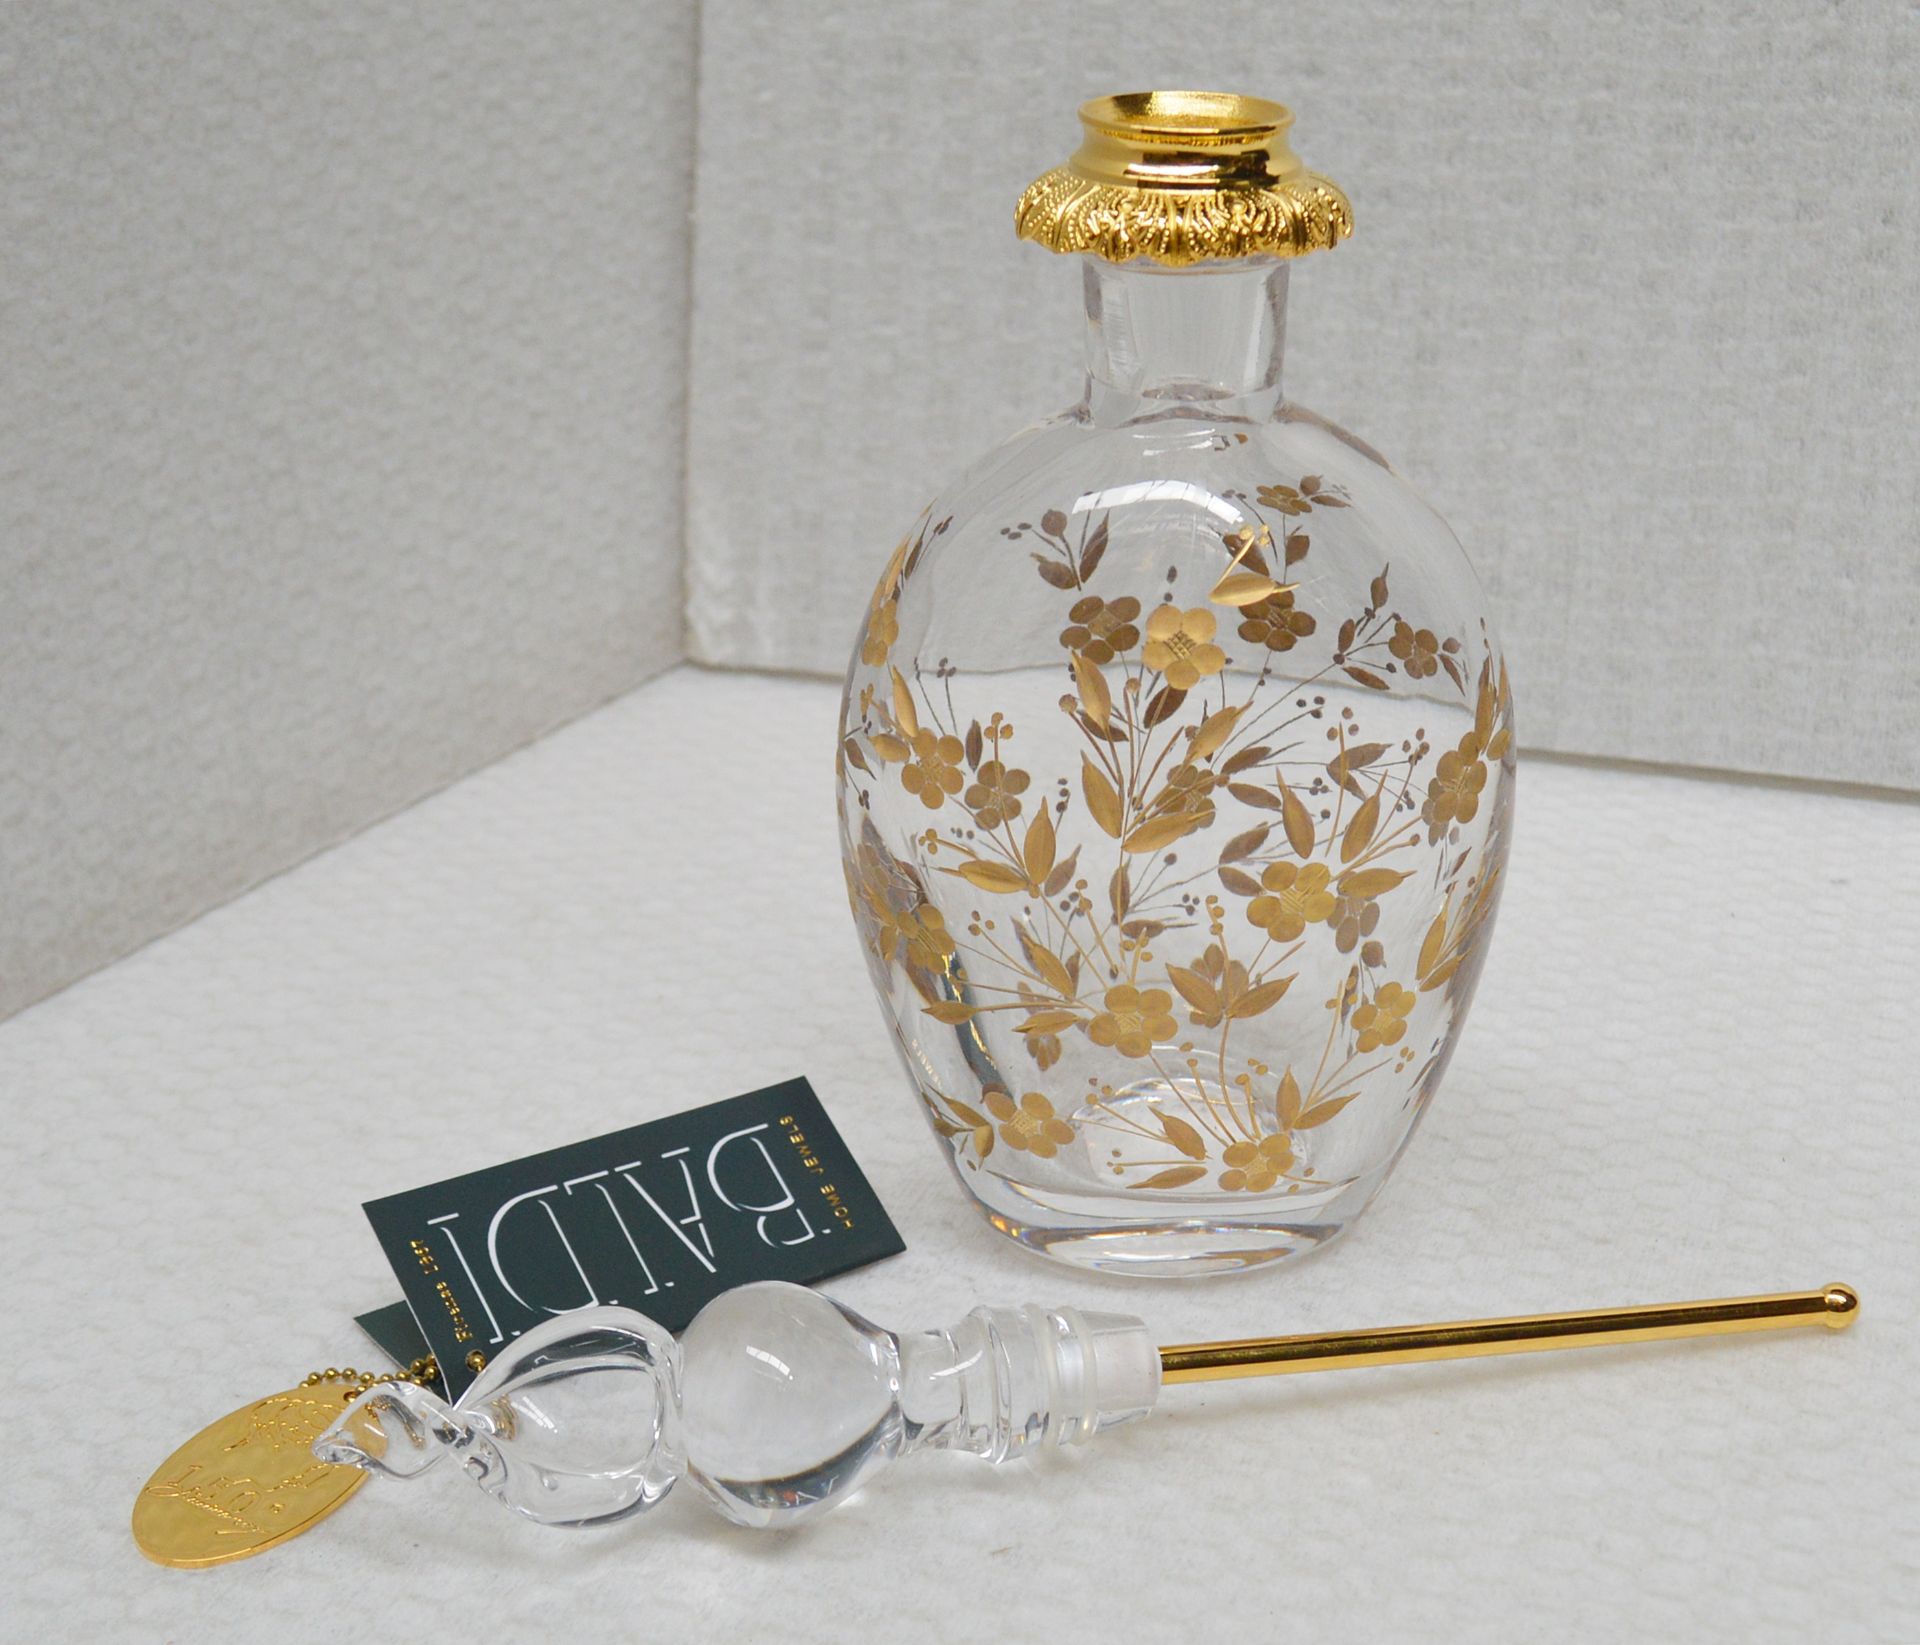 1 x BALDI 'Home Jewels' Italian Hand-crafted Artisan Oval Bottle In Clear Crystal - Gilt Spring - Image 2 of 8